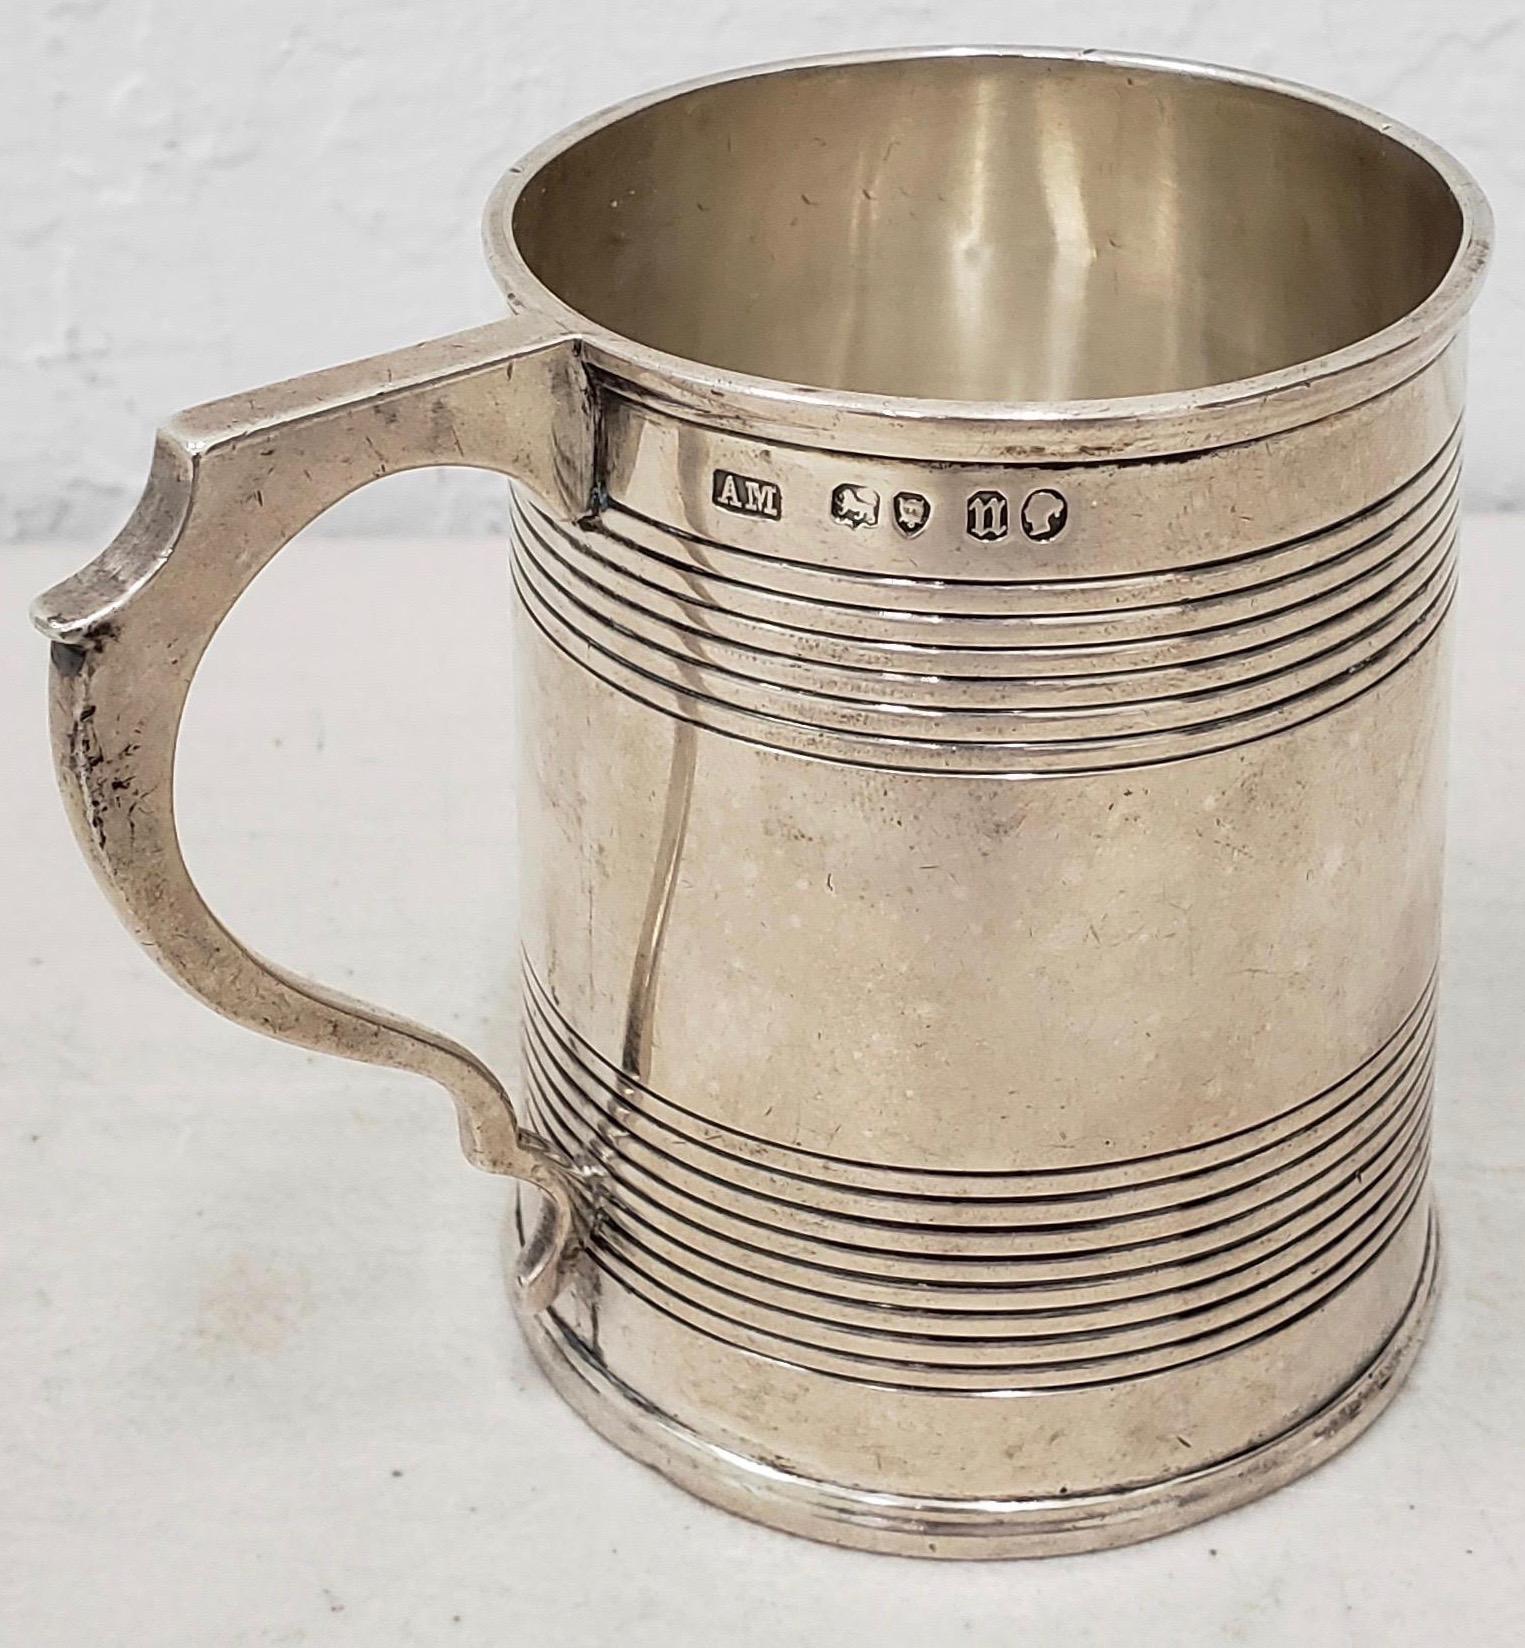 19th Century Sterling Silver Christening Cup with Hallmarks 1